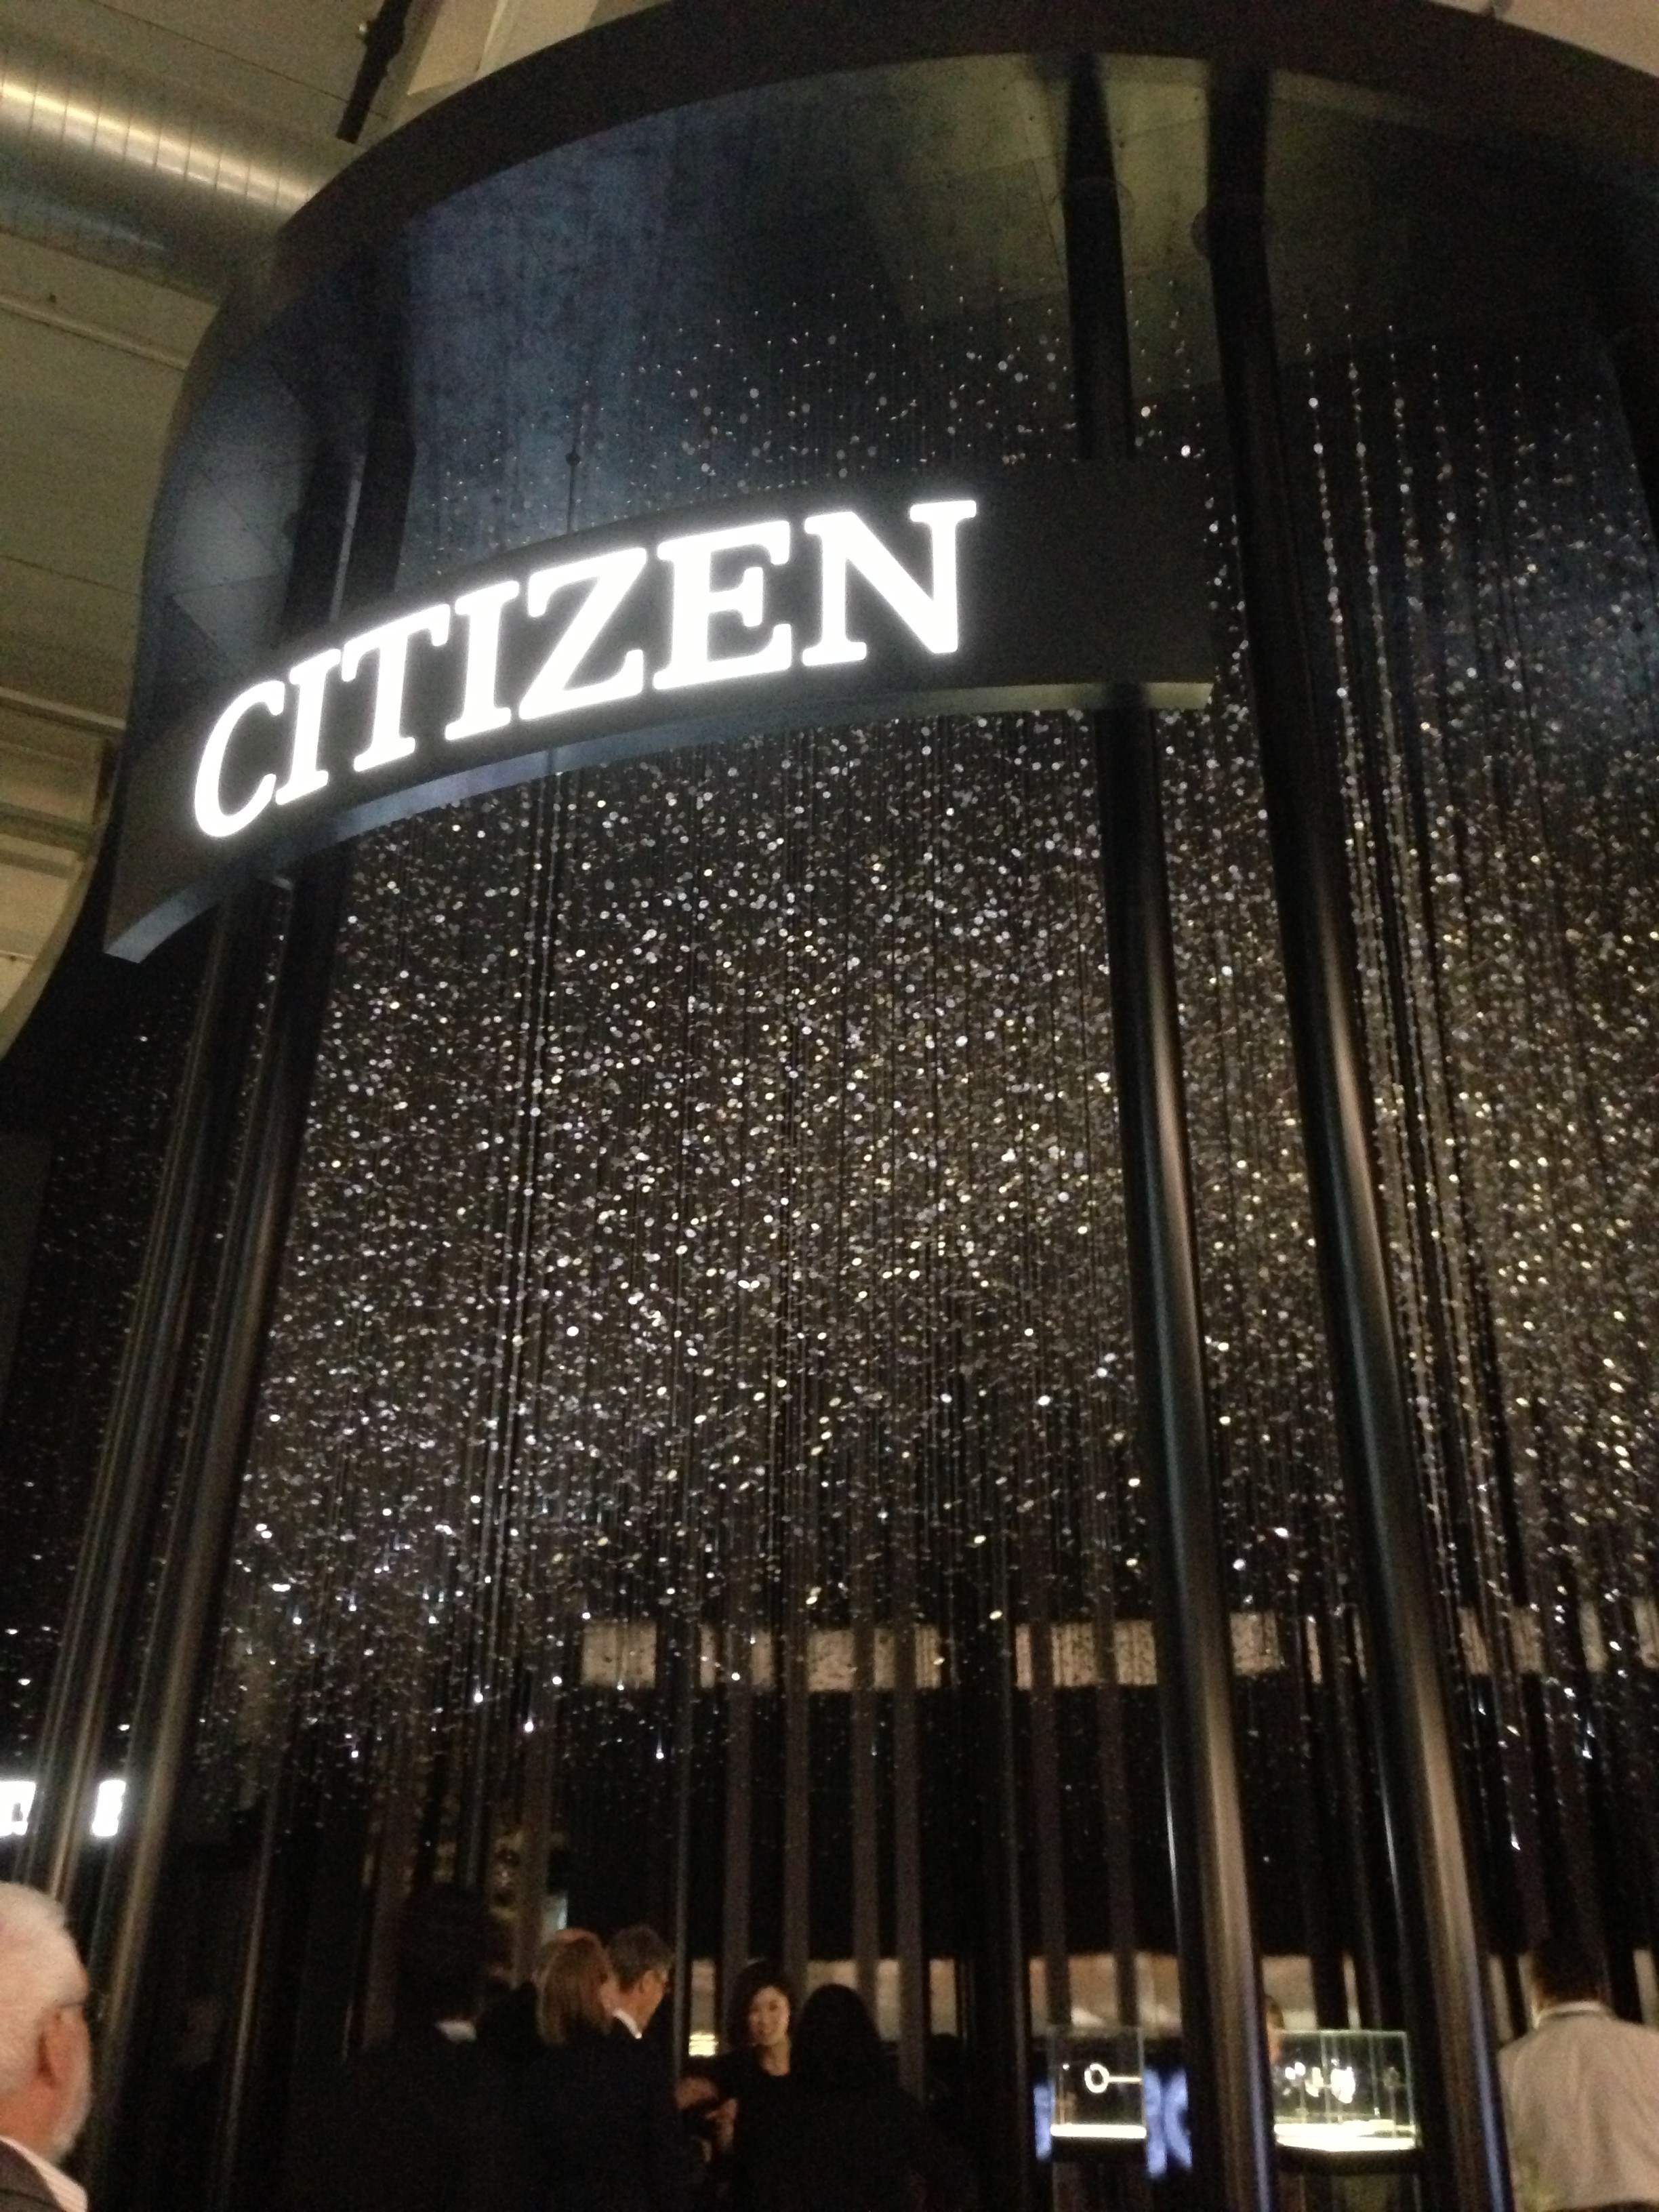 At Citizen they had made a starry sky with small gears from the inside of a Watch hanging from the ceiling.